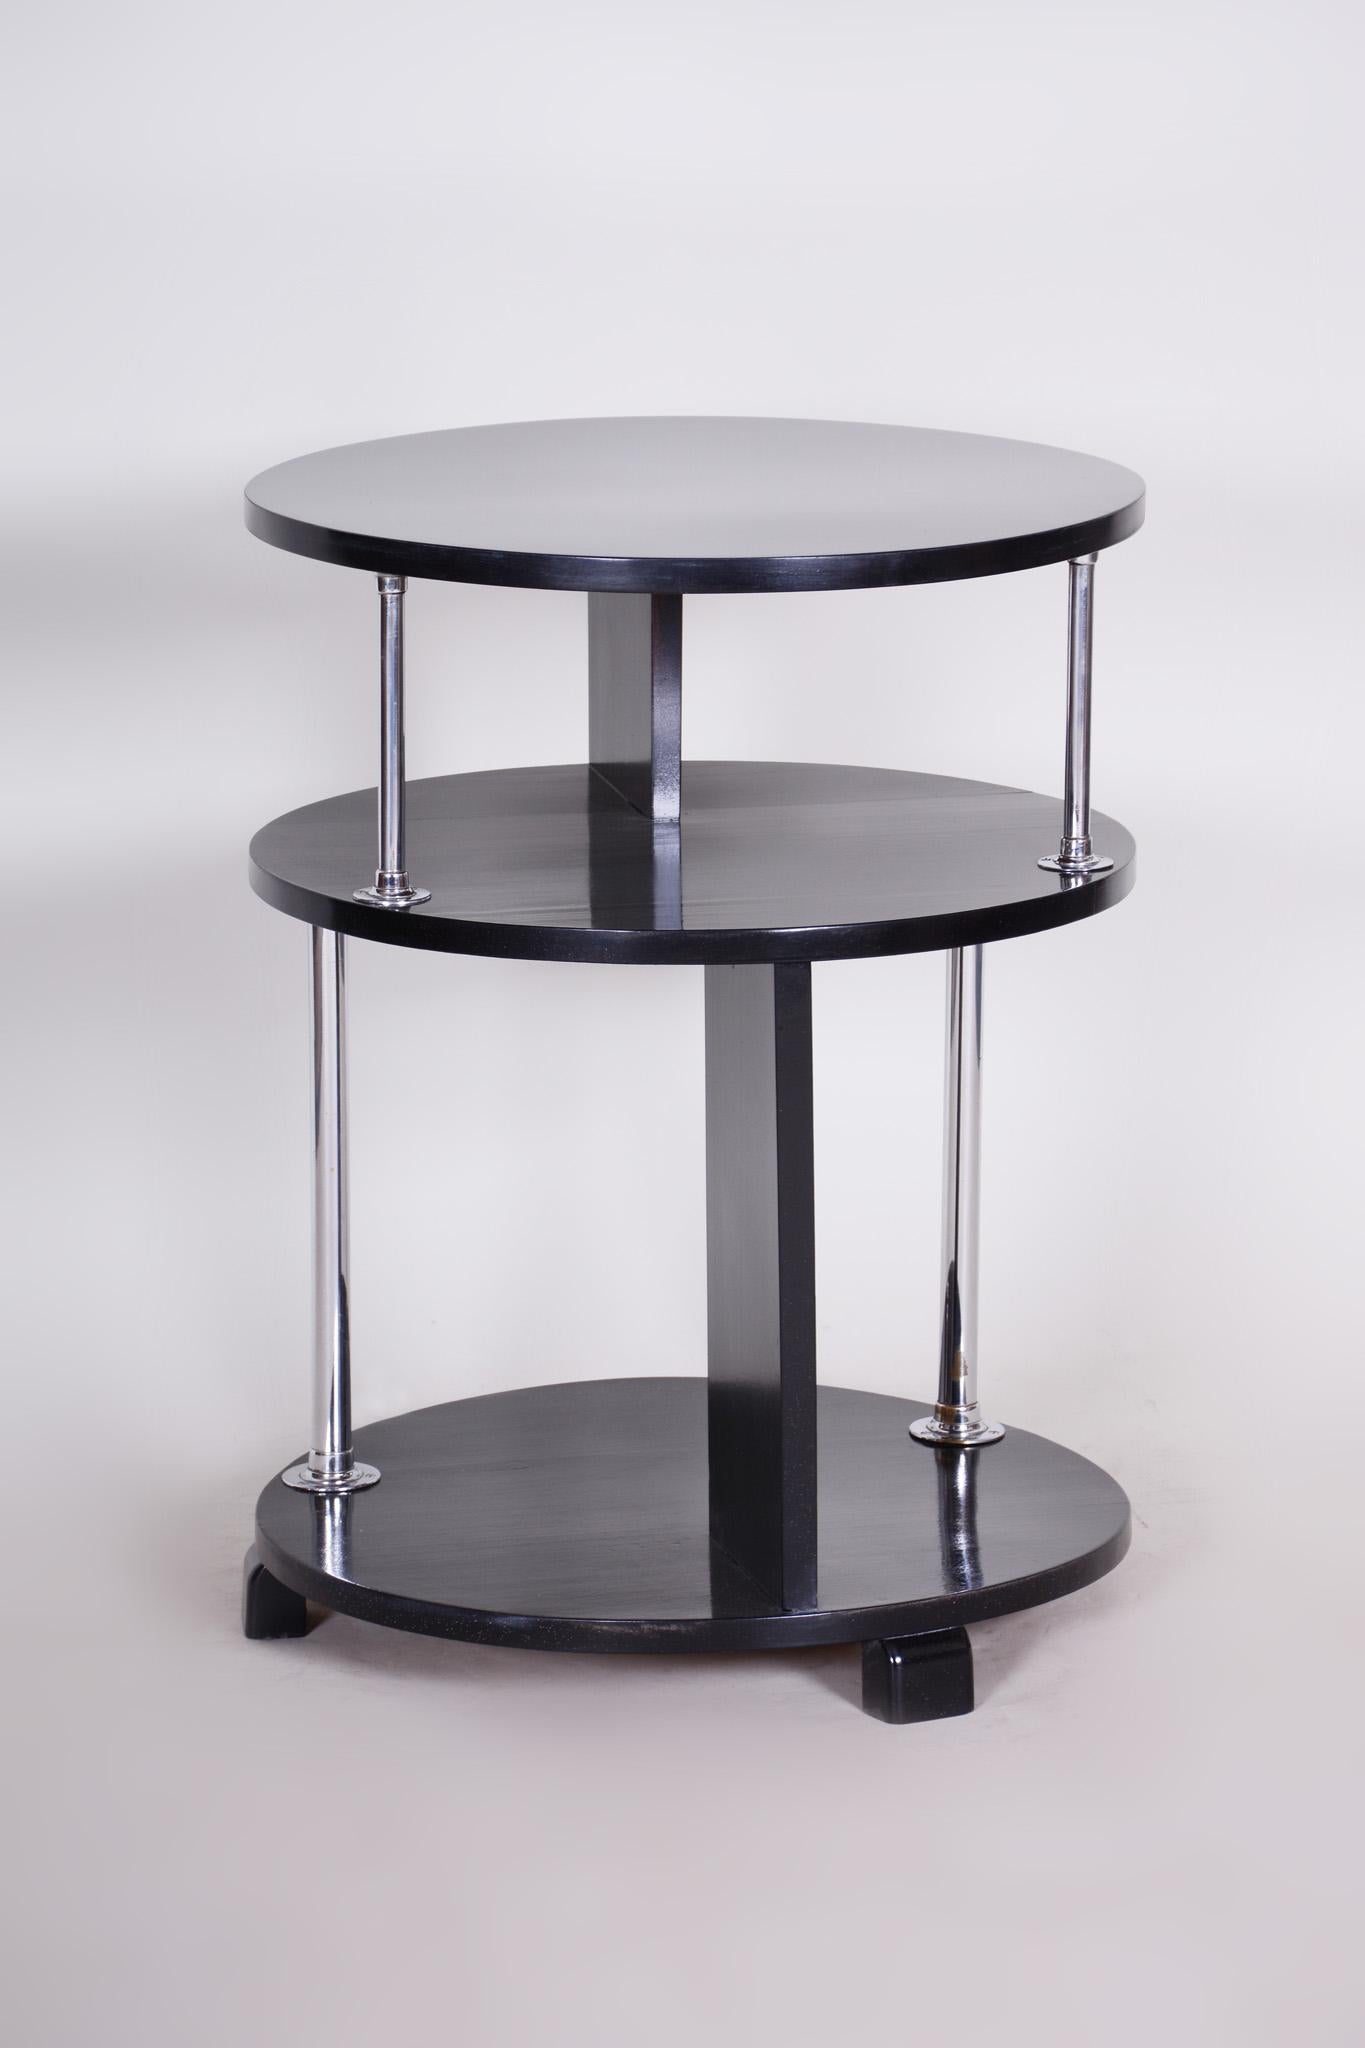 20th Century Unusual Small Czech Restored Round Black Beech Chrome Bauhaus Table, 1930s For Sale